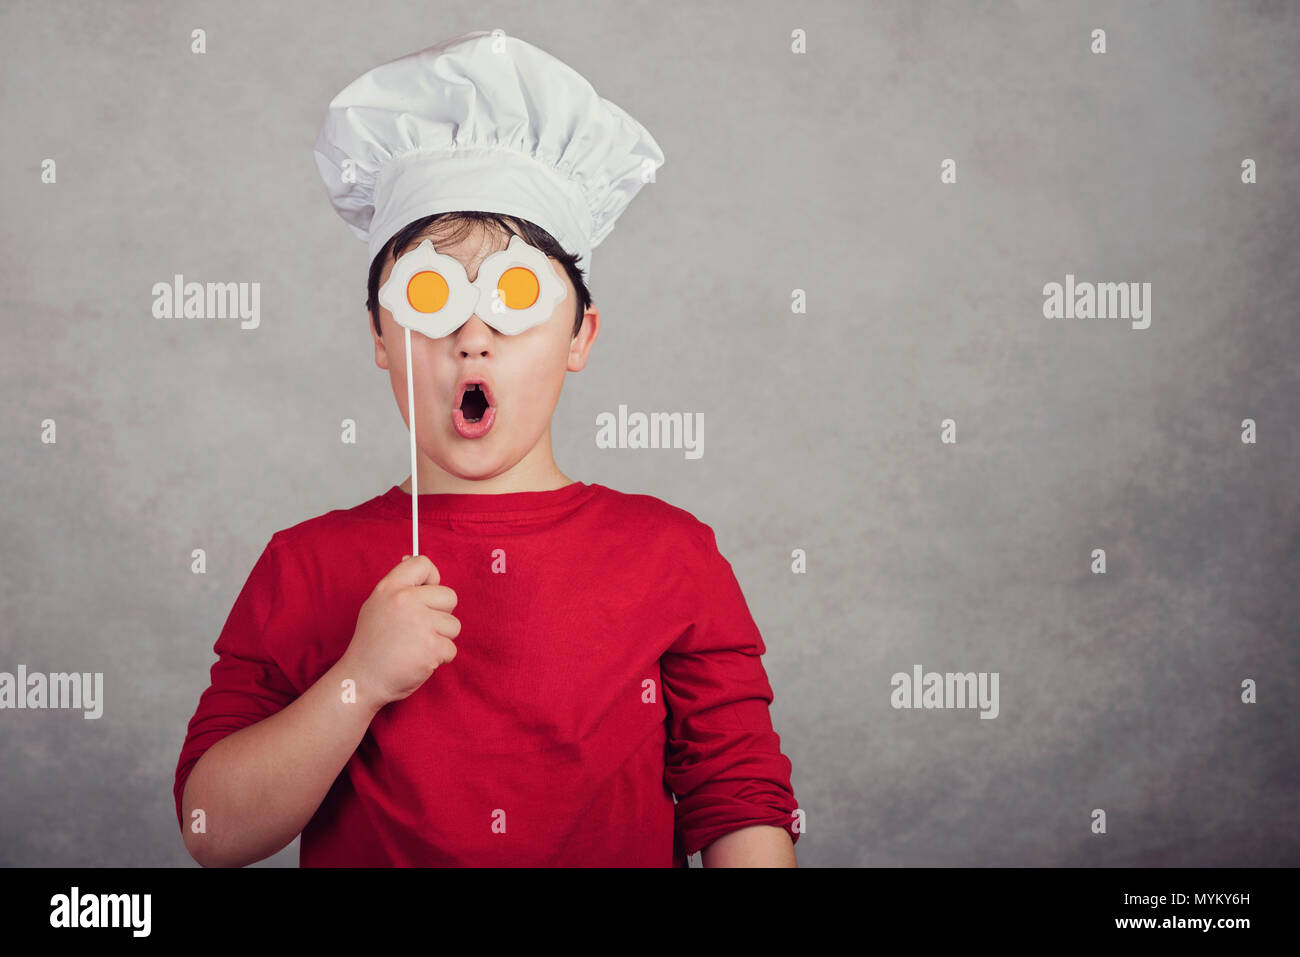 funny child with fried eggs in his eyes on gray background Stock Photo